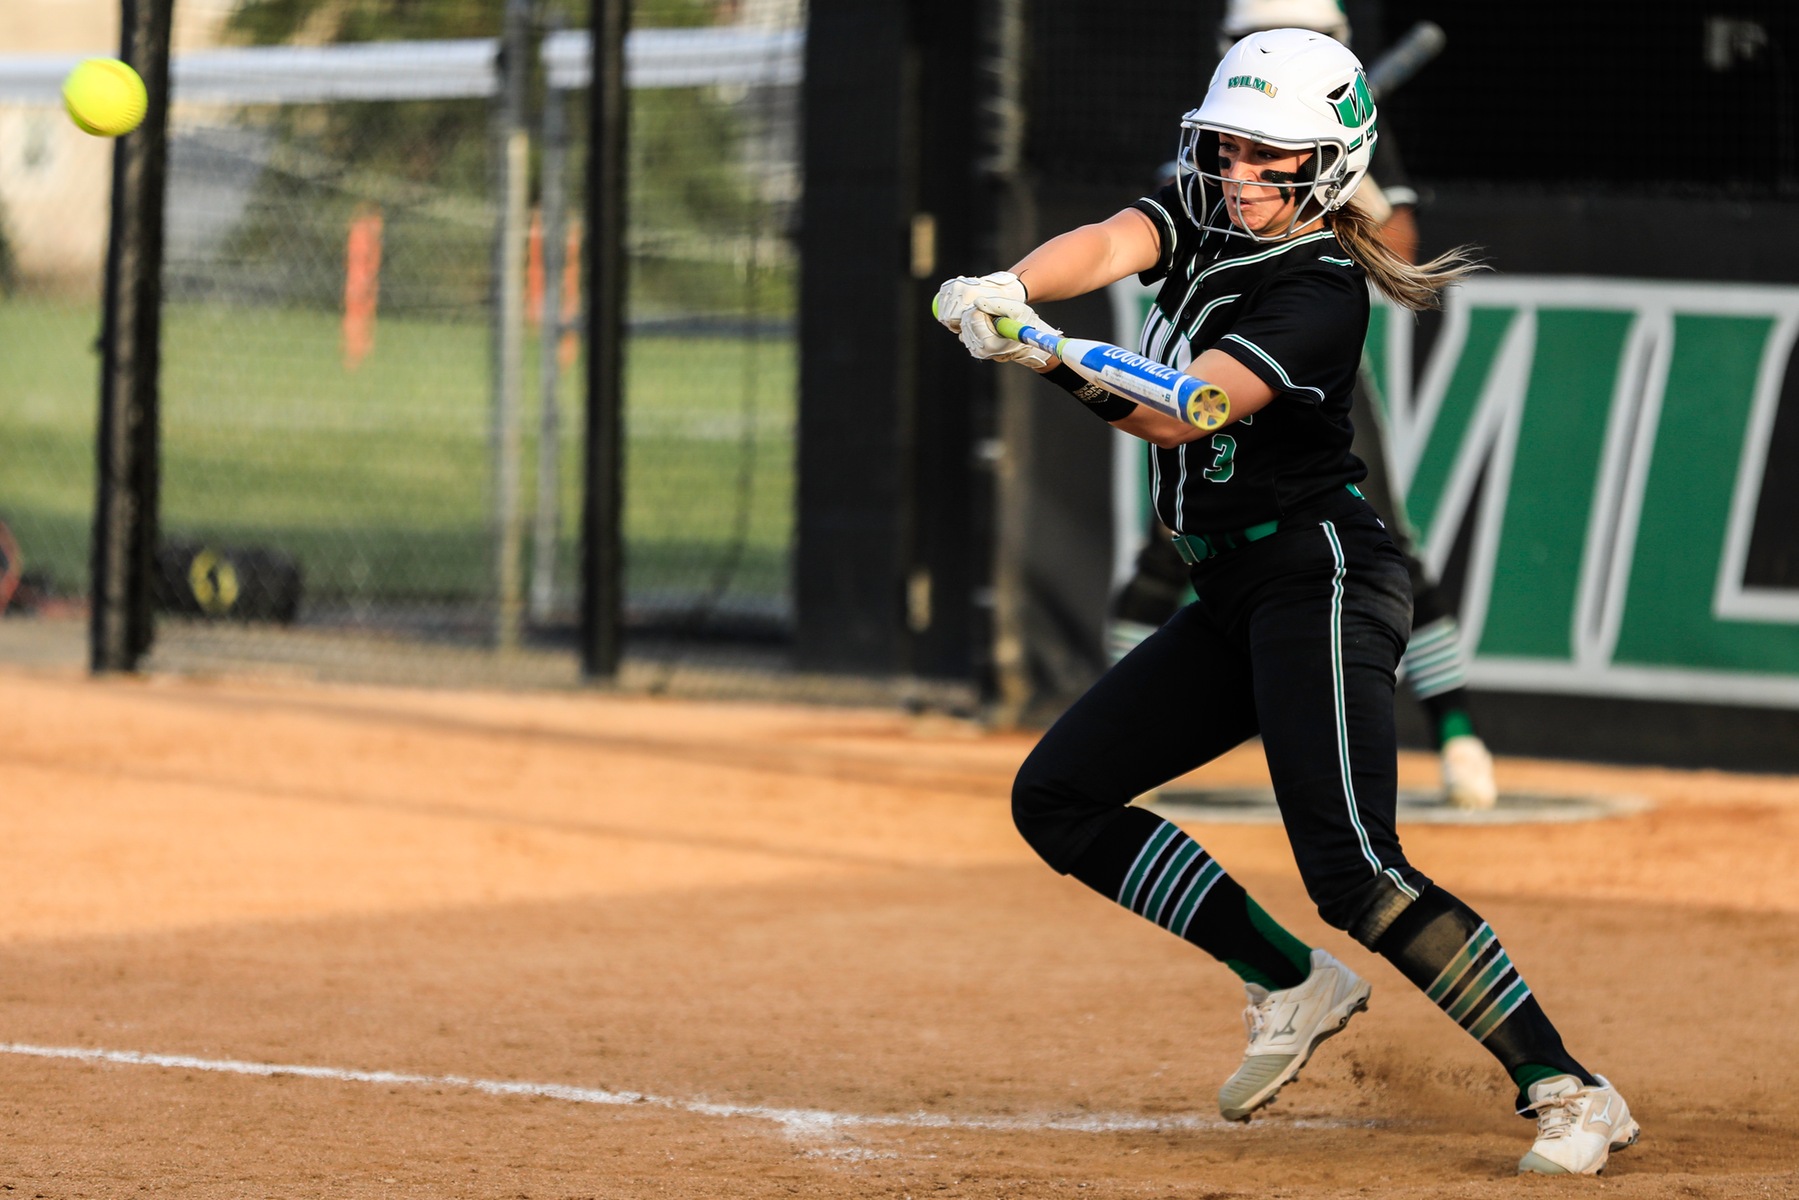 Copyright 2019; Wilmington University. All rights reserved. Photo of Alexis Sann hitting the game-winning single in the bottom of the fifth in game two. Photo by Christ Vitale. April 4, 2019 vs. Chestnut Hill (Game 2).